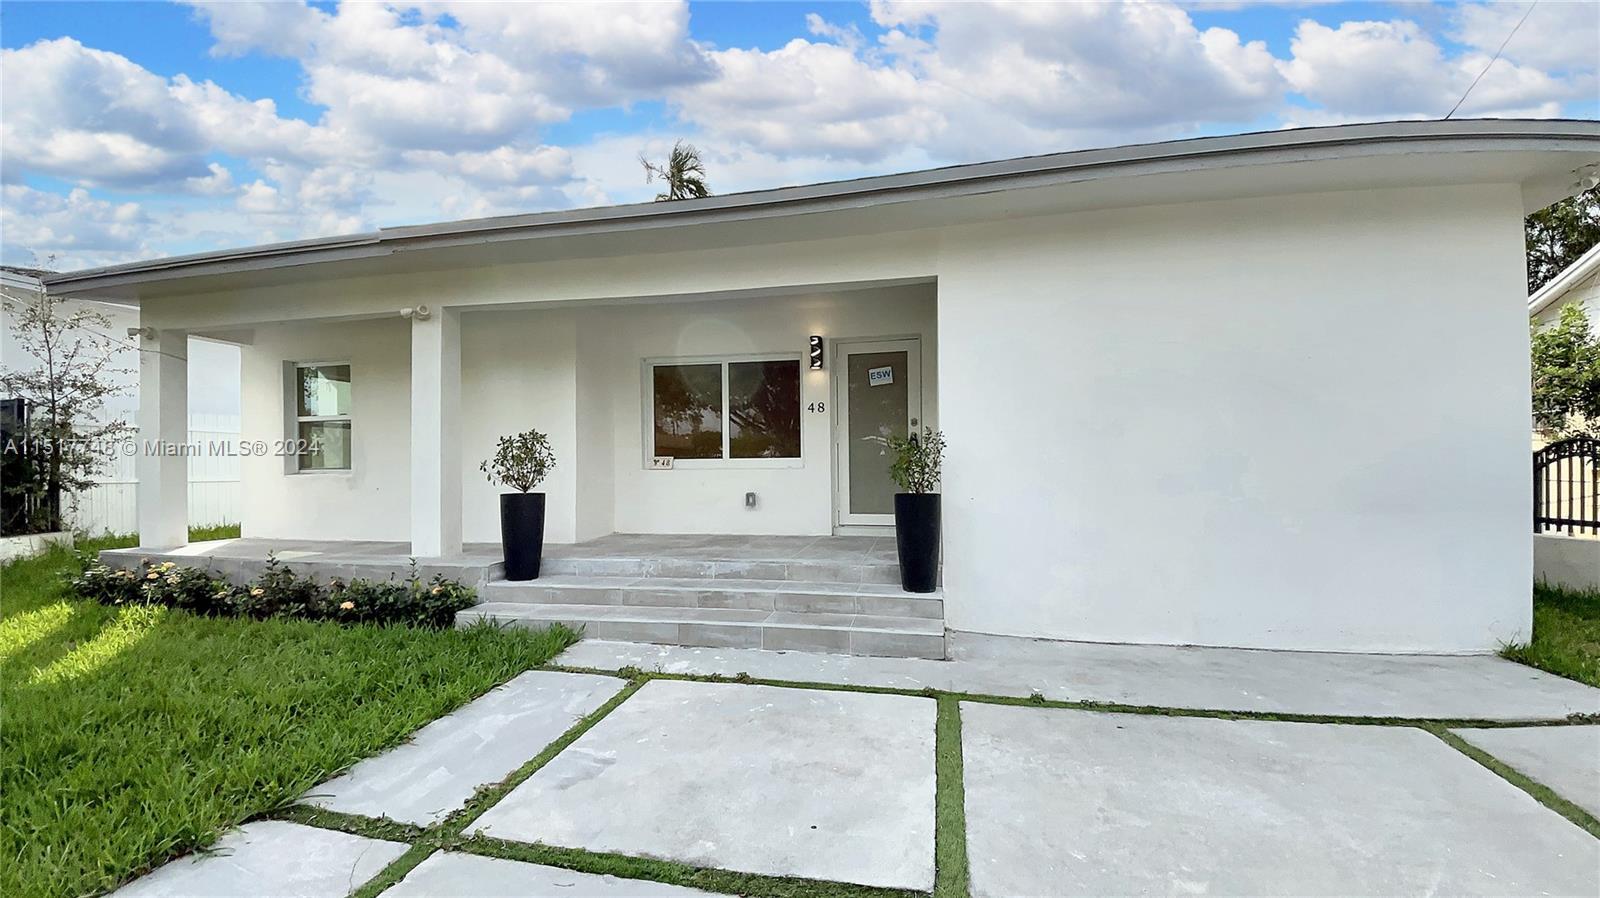 Photo of 48 NW 41st St in Miami, FL